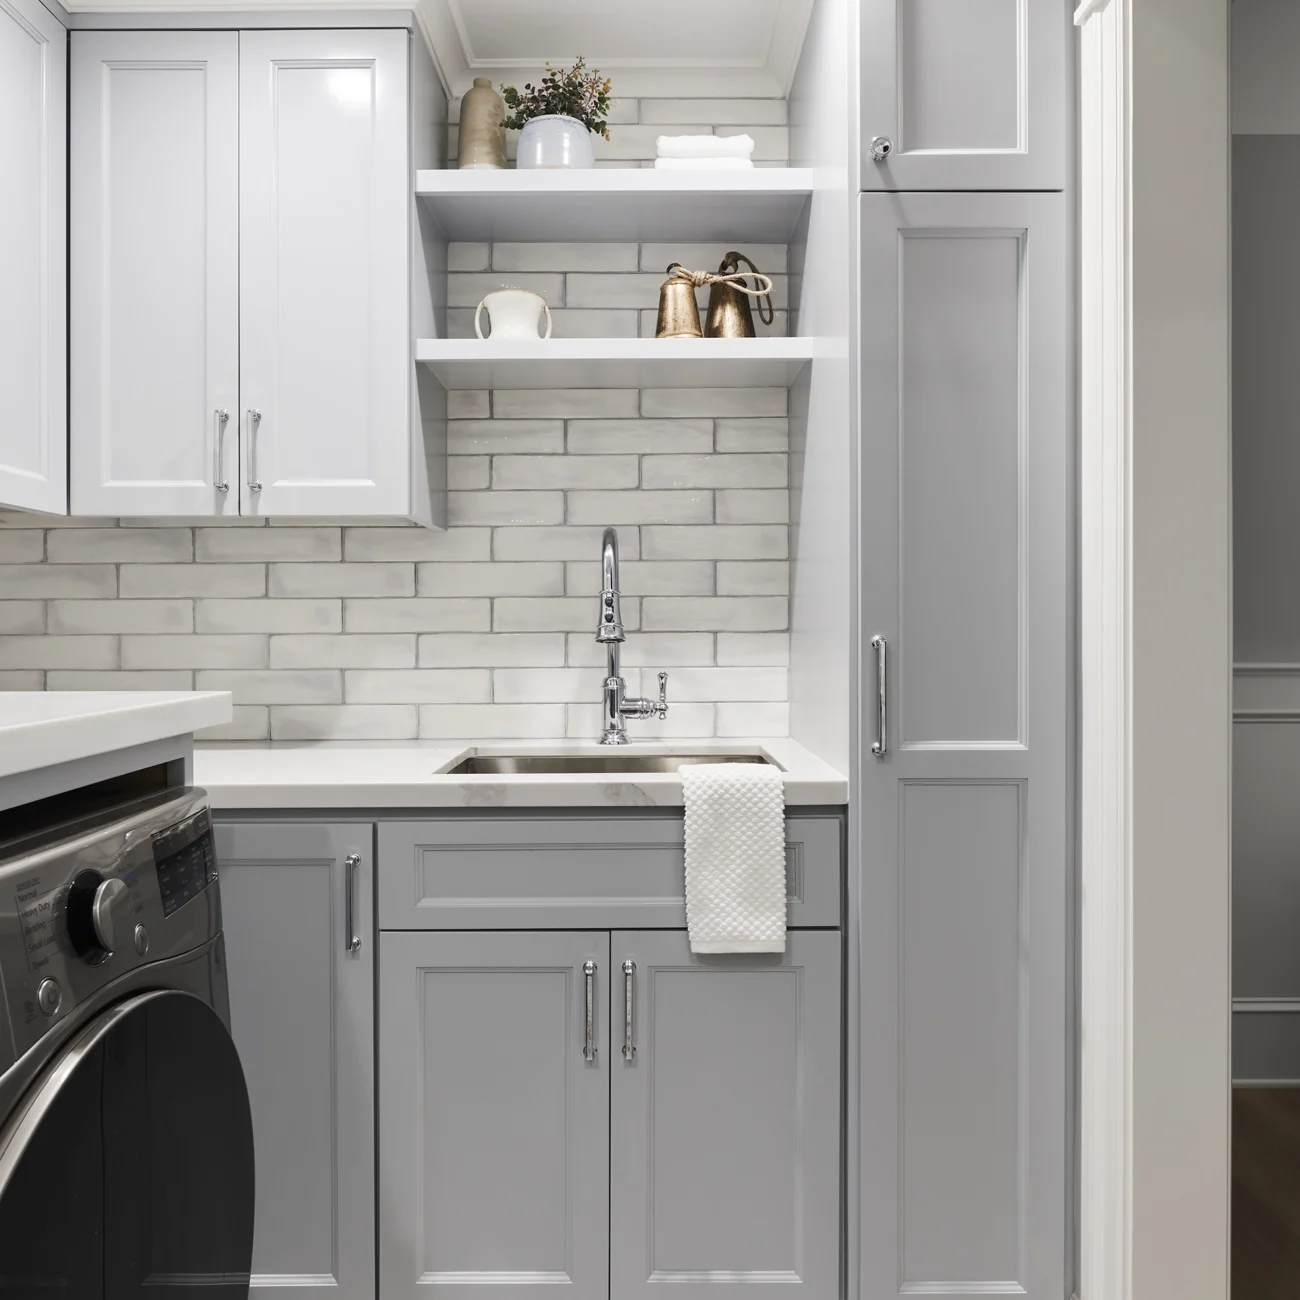 Christine Vroom Interiors Vigilance | Laundry room with light grey cabinets, subway tiles and shelving